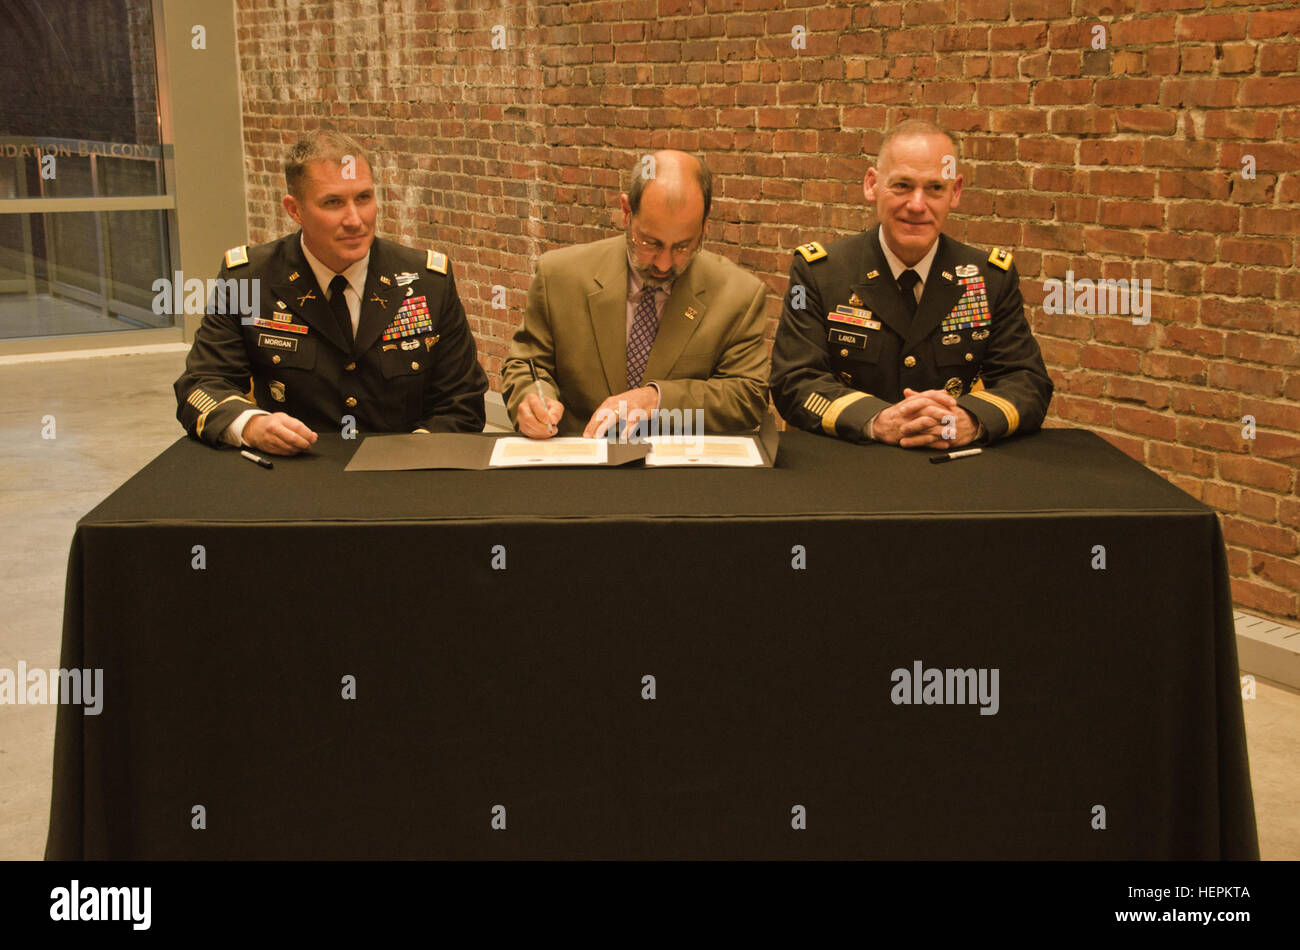 Col. Daniel S. Morgan, commander, Joint Base Lewis-McChord, left, Mark A. Pagano, chancellor, University of Washington-Tacoma, center, and Lt. Gen. Stephen R. Lanza, commanding general, I Corps, JBLM, right, come together to sign partnership resolutions at the UW-T, Oct. 29, 2015. Both JBLM and I Corps signed partnership resolutions with the UW-T agreeing to become a model university and military institutional partnership. (U.S. Army photo by Sgt. Jasmine Higgins, 28th Public Affairs Detachment) Partnership 151030-A-HS859-946 Stock Photo